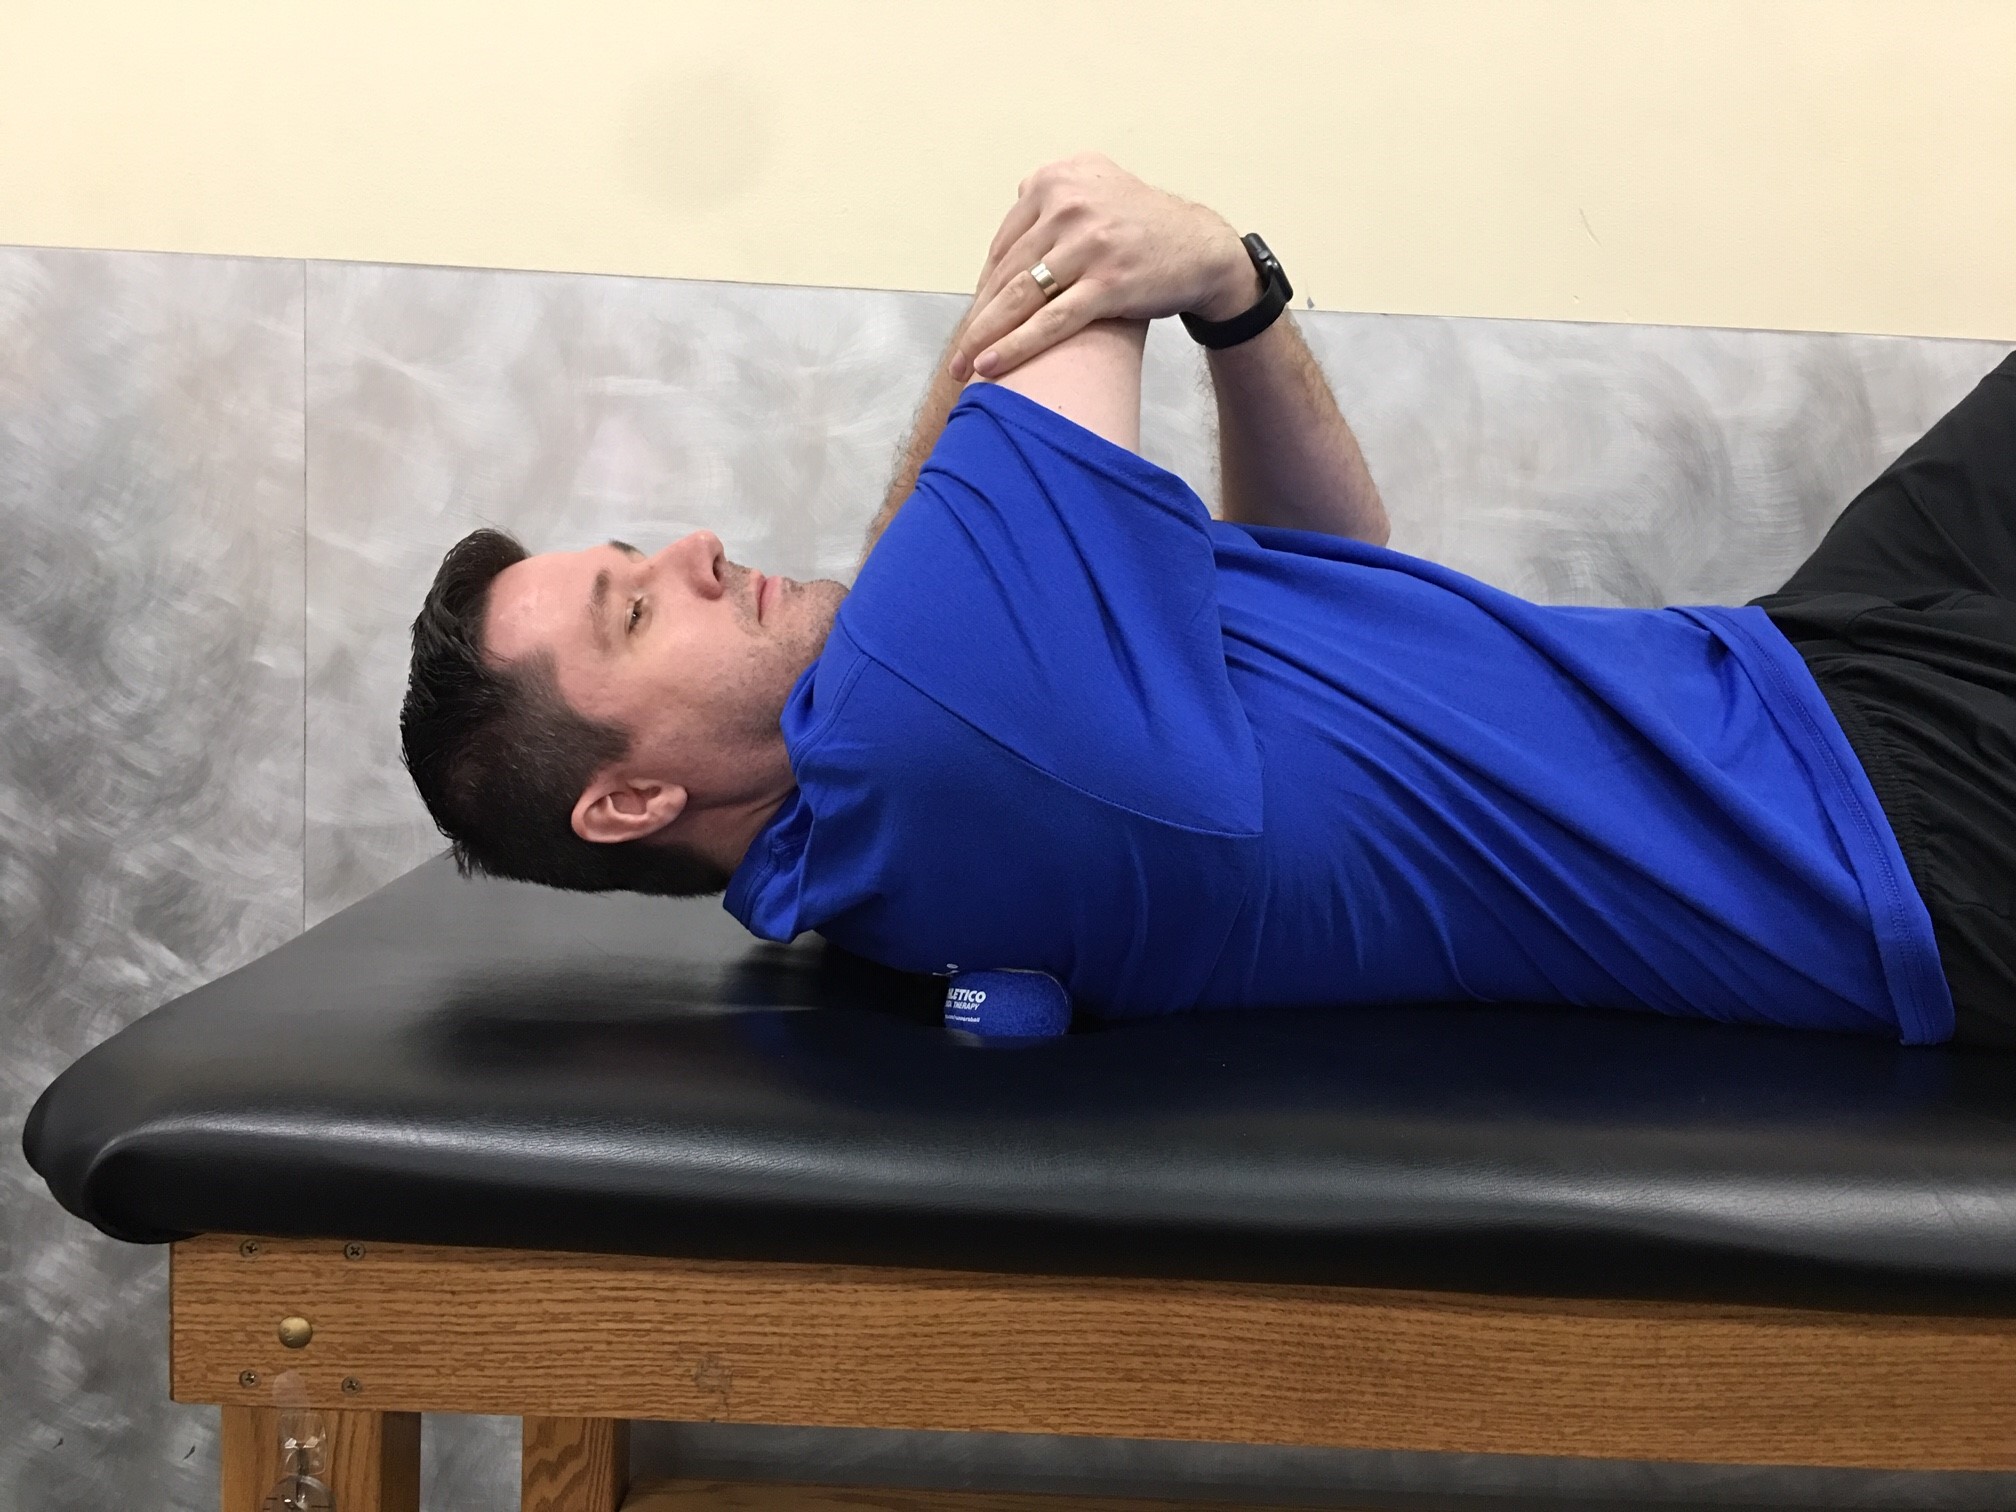 How to Massage Your Upper Back & Neck With A Foam Roller